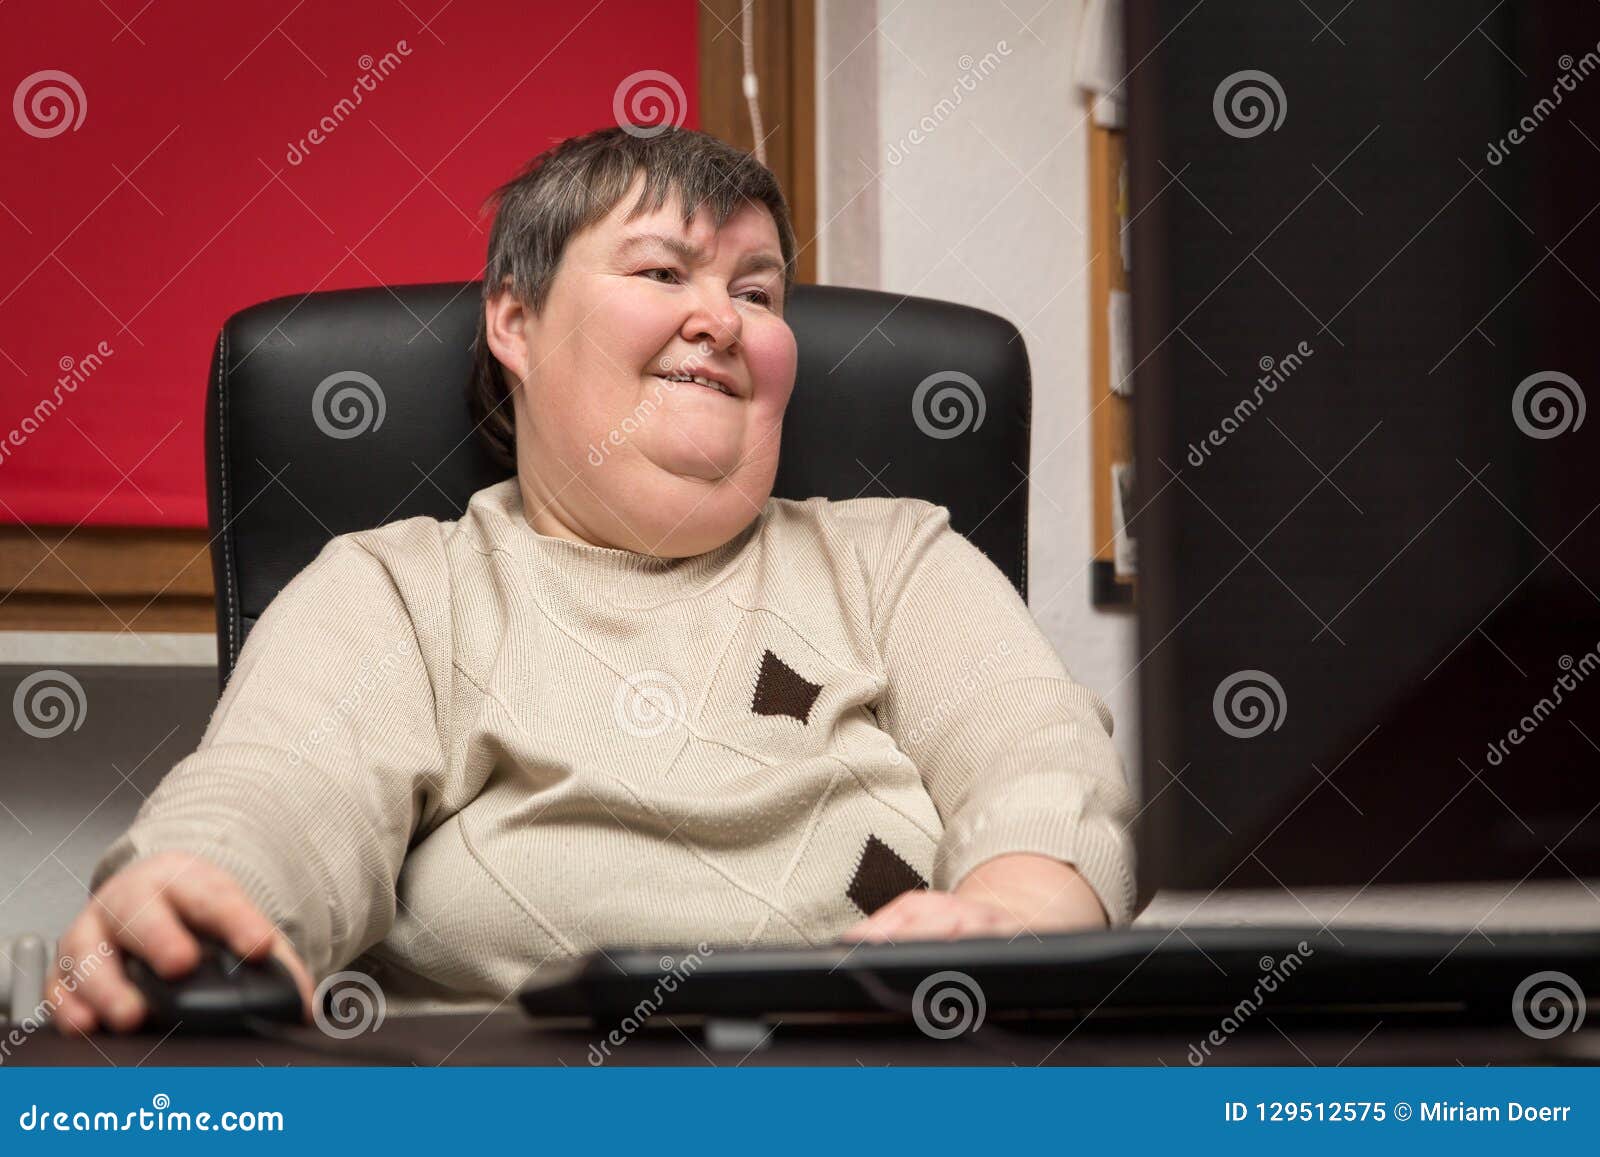 woman with a disability develop sitting at the computer, alternative therapy